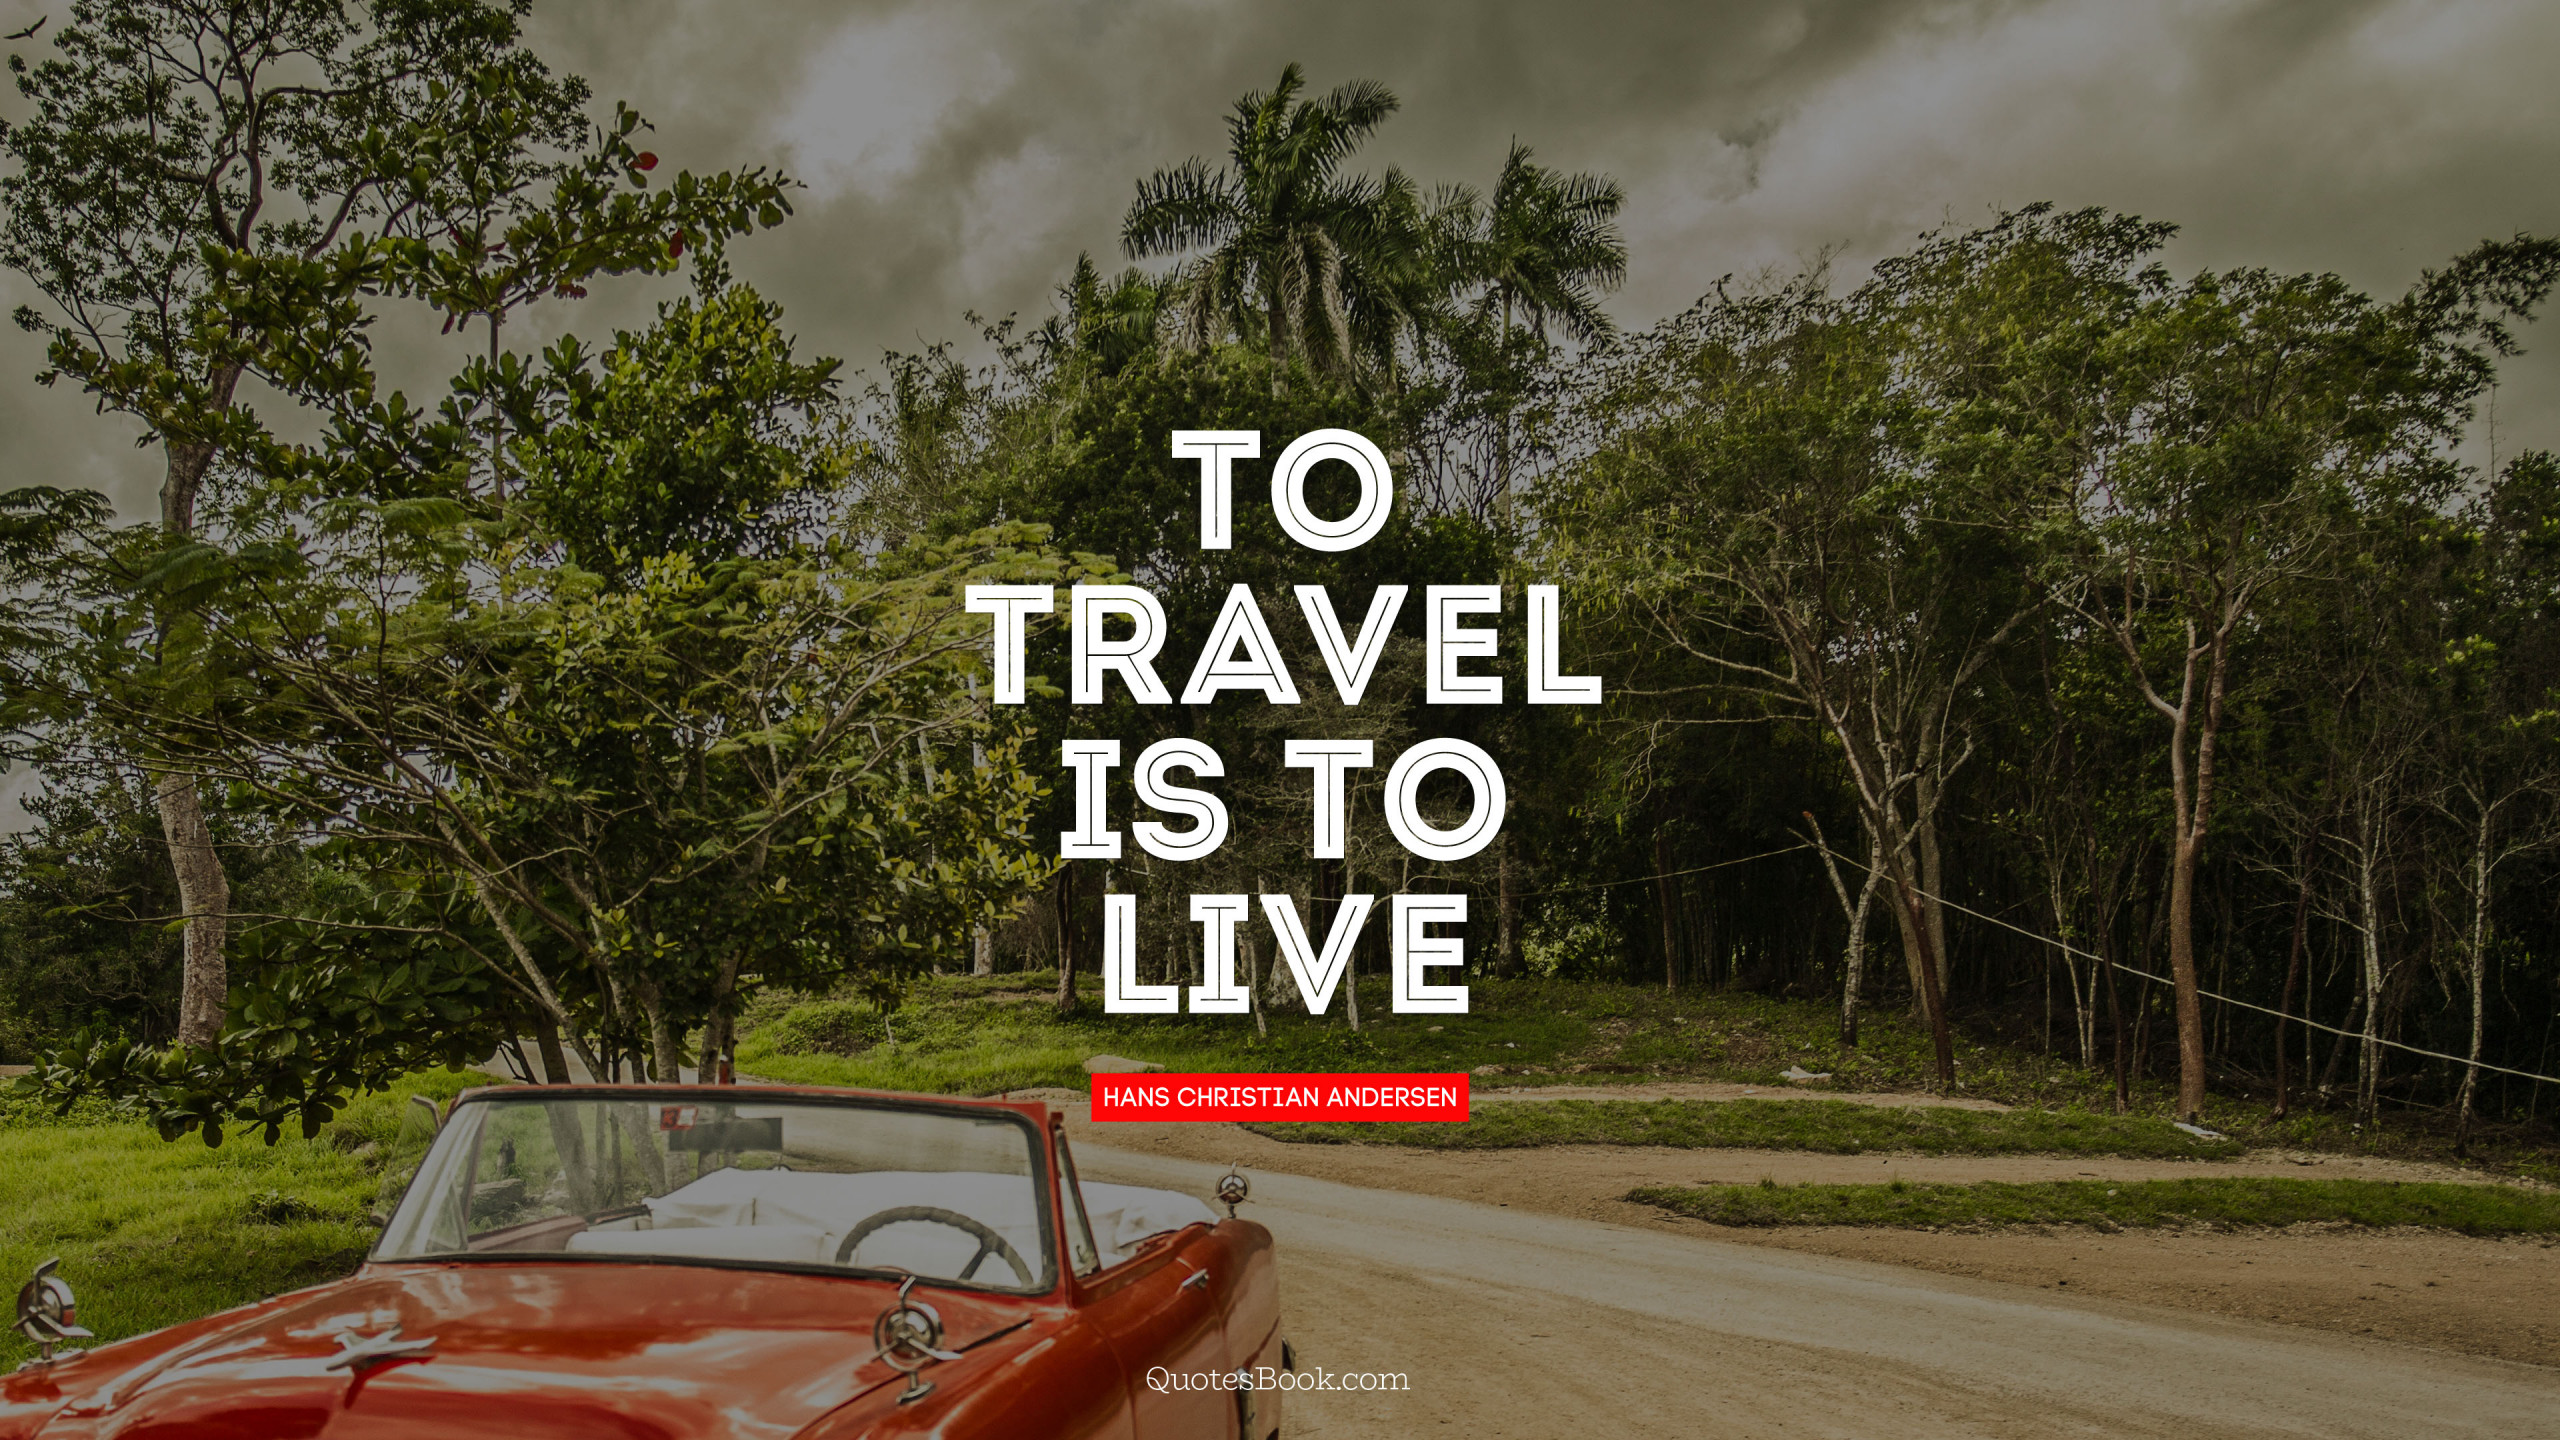 To travel is to live. - Quote by Hans Christian Andersen - QuotesBook